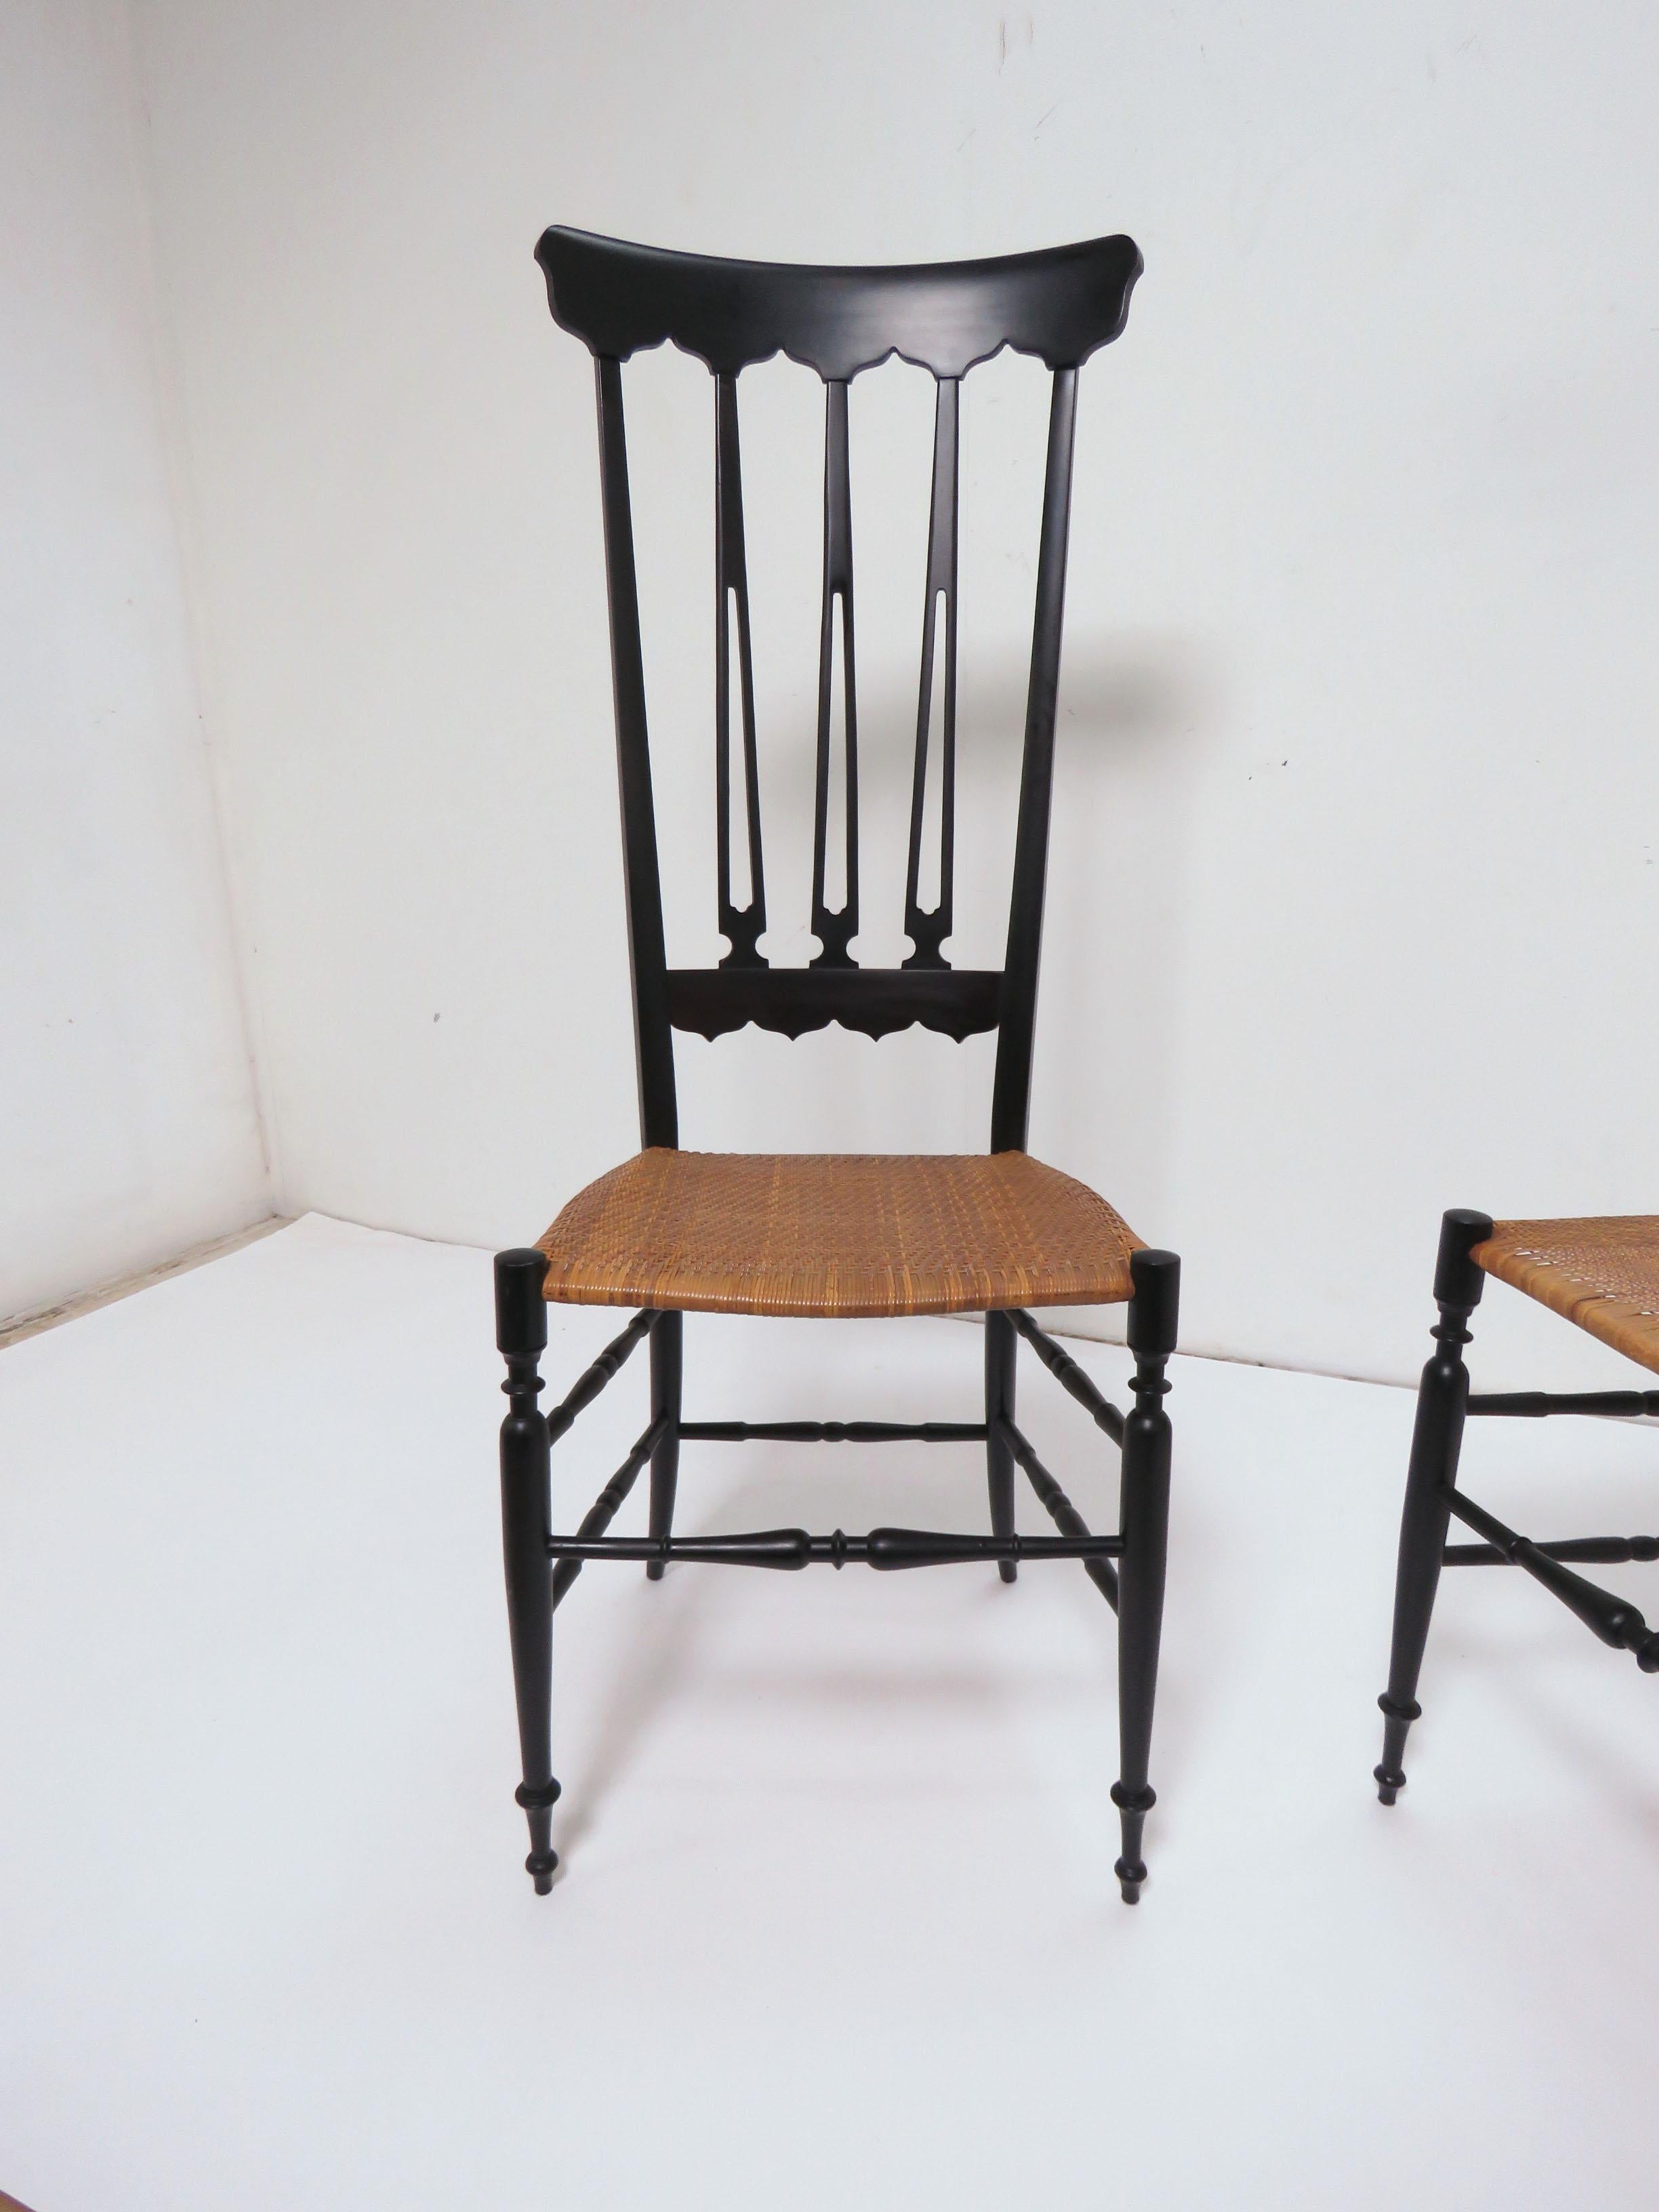 Italian Pair of Chiavari High Back Chairs in Black Lacquer and Cane, circa 1960s